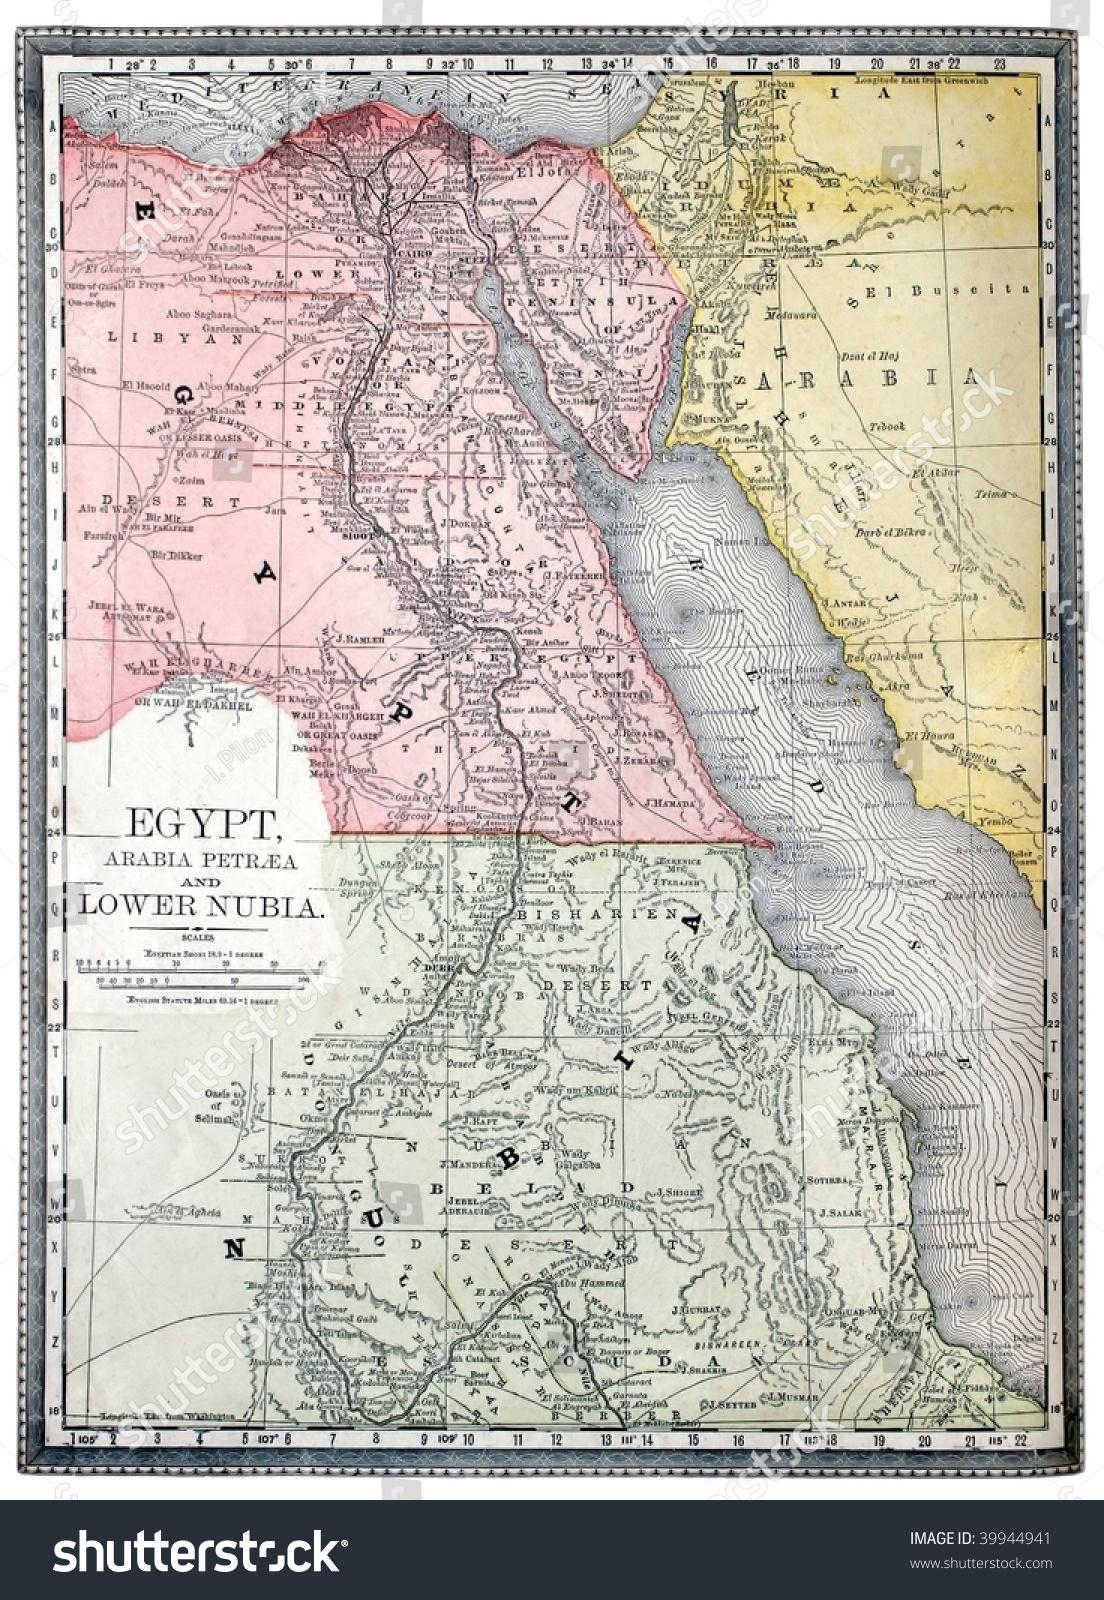 Stock Photo Original Map Of Egypt And Nubia Line Colored Printed In 39944941 